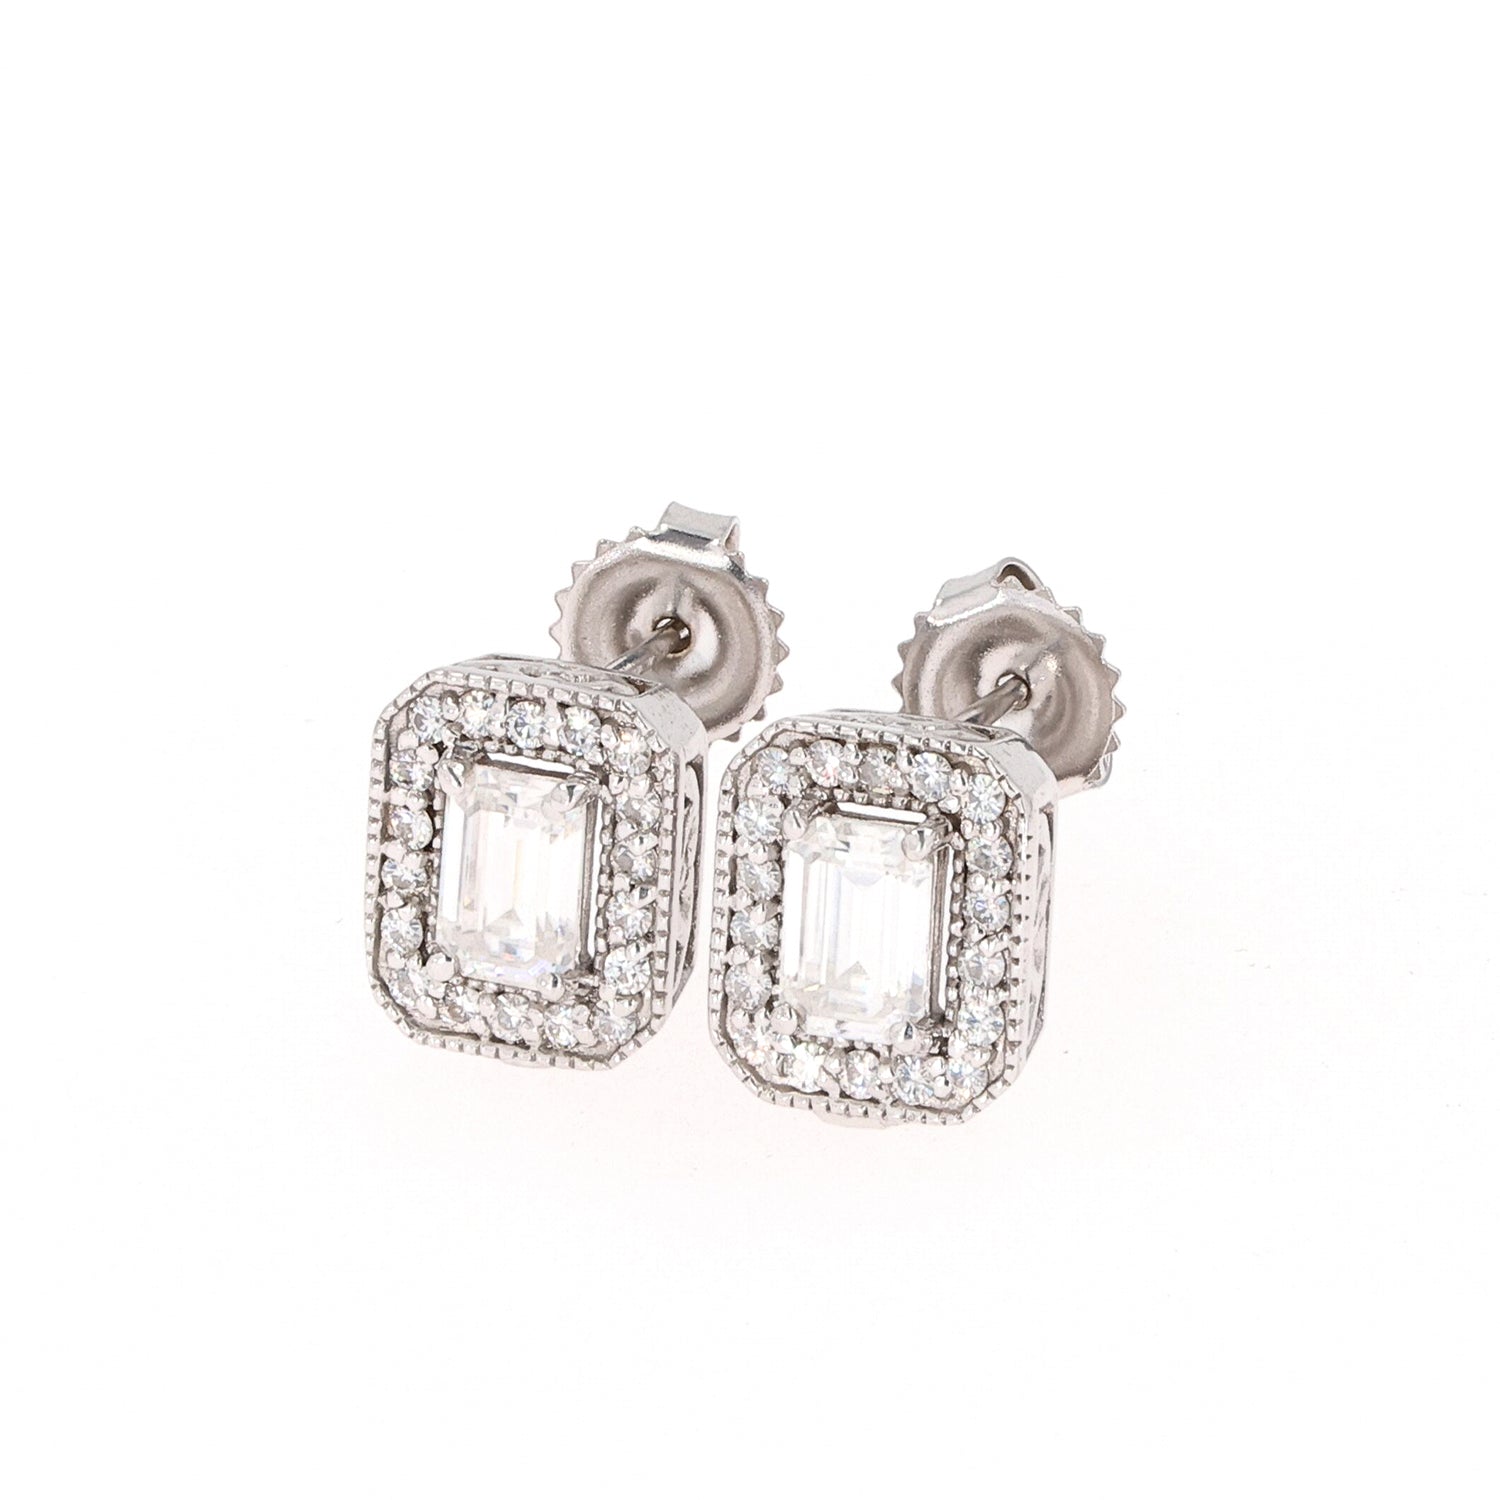 1.52 CTW DEW Emerald Near-Colorless Moissanite Halo Earrings in 14K White Gold